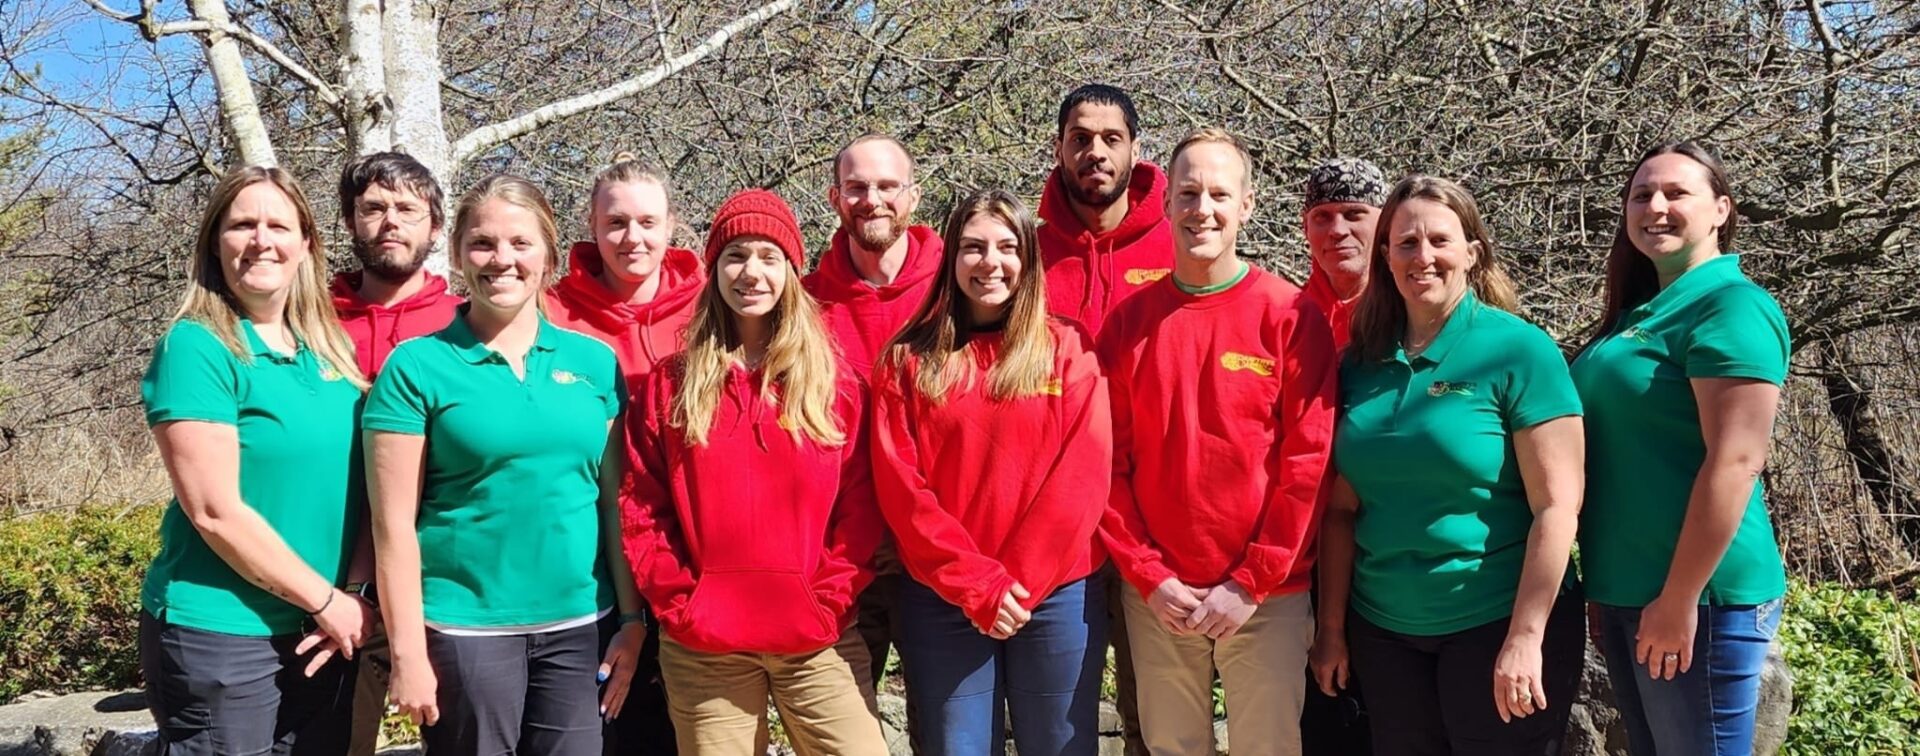 This image shows eleven people posing outdoors in matching red and green tops, likely colleagues, with a natural backdrop of trees and shrubbery.